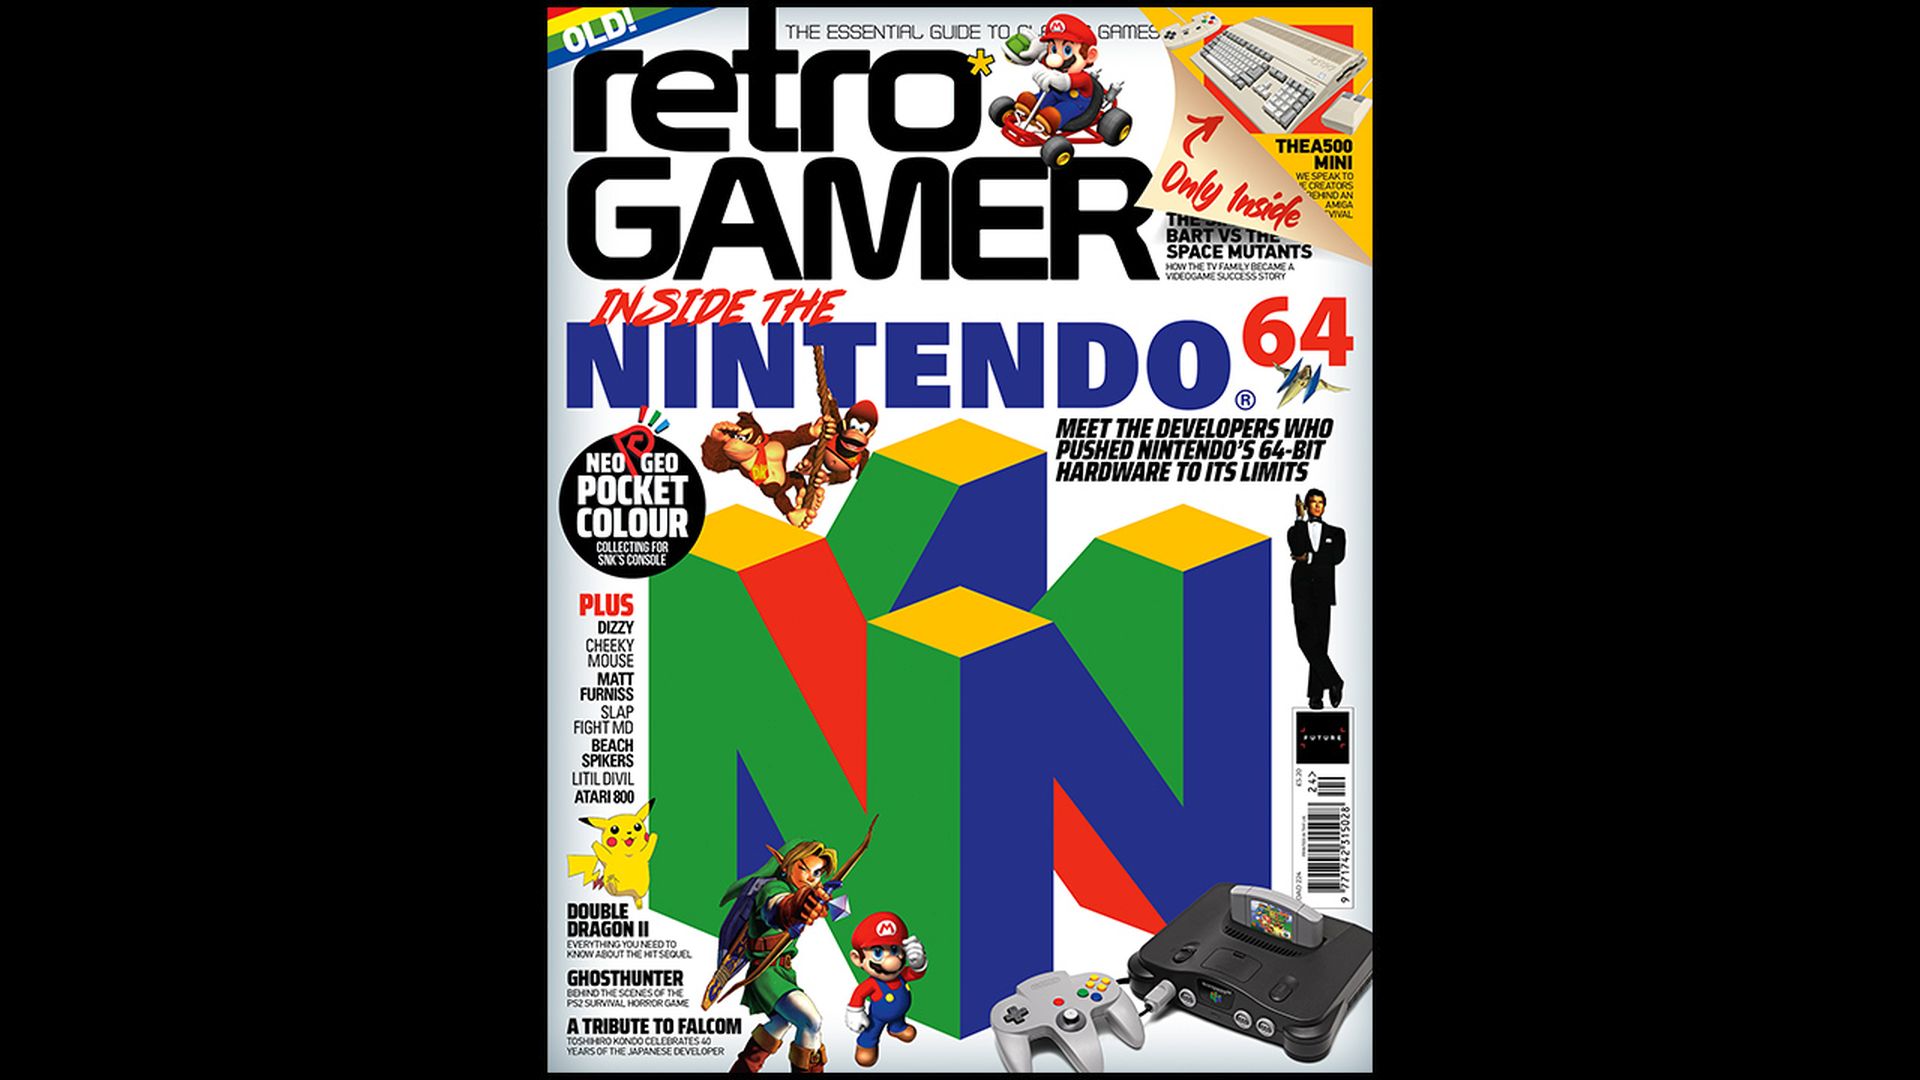 ﻿The new Retro Gamer reveals the Nintendo 64 didn’t need to be 64-bit